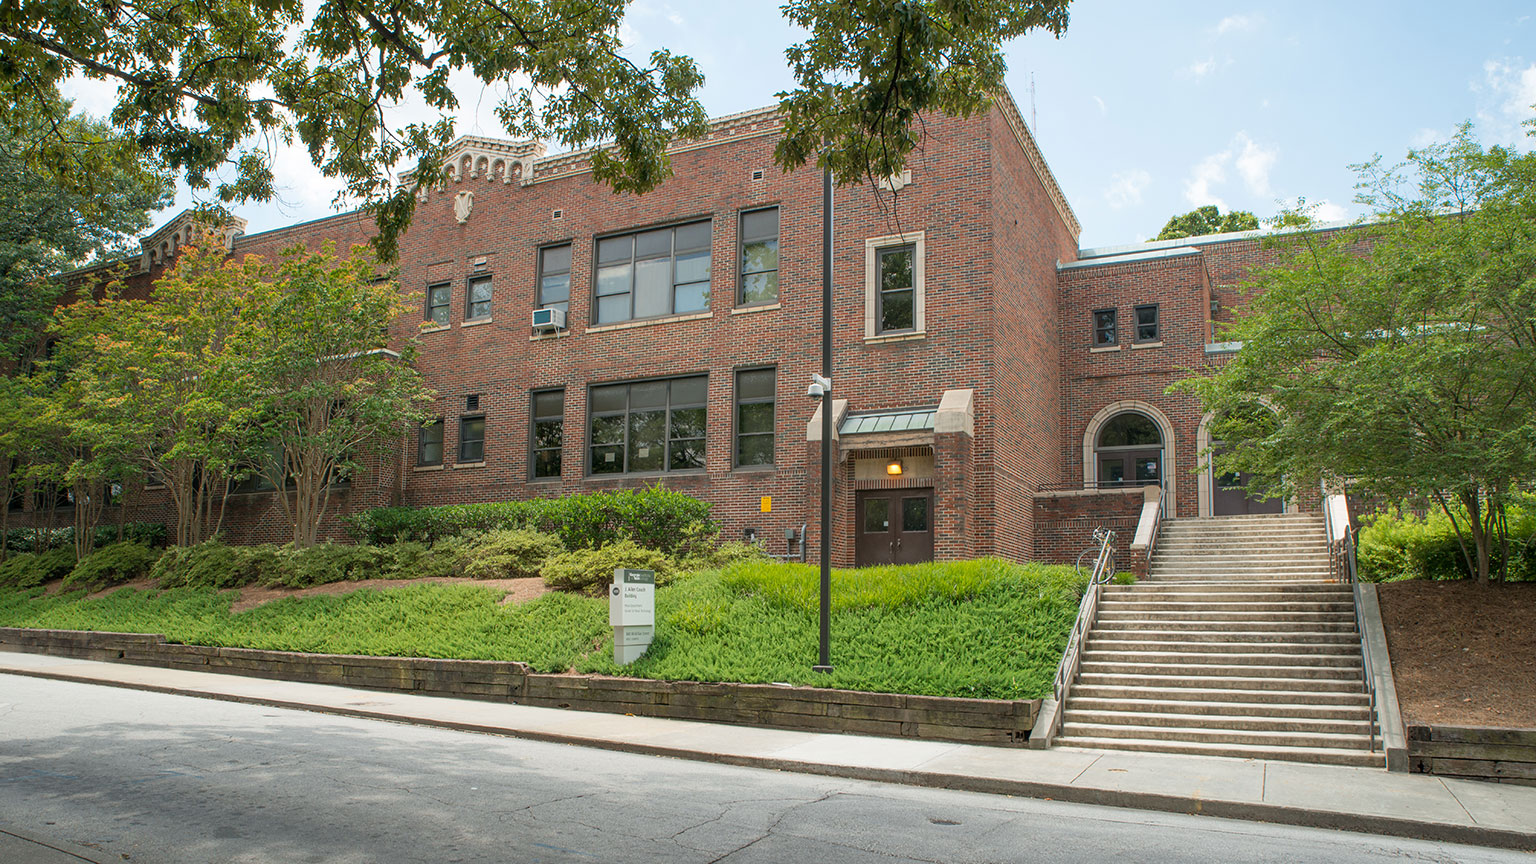 A picture of the Couch Building at Georgia Tech.